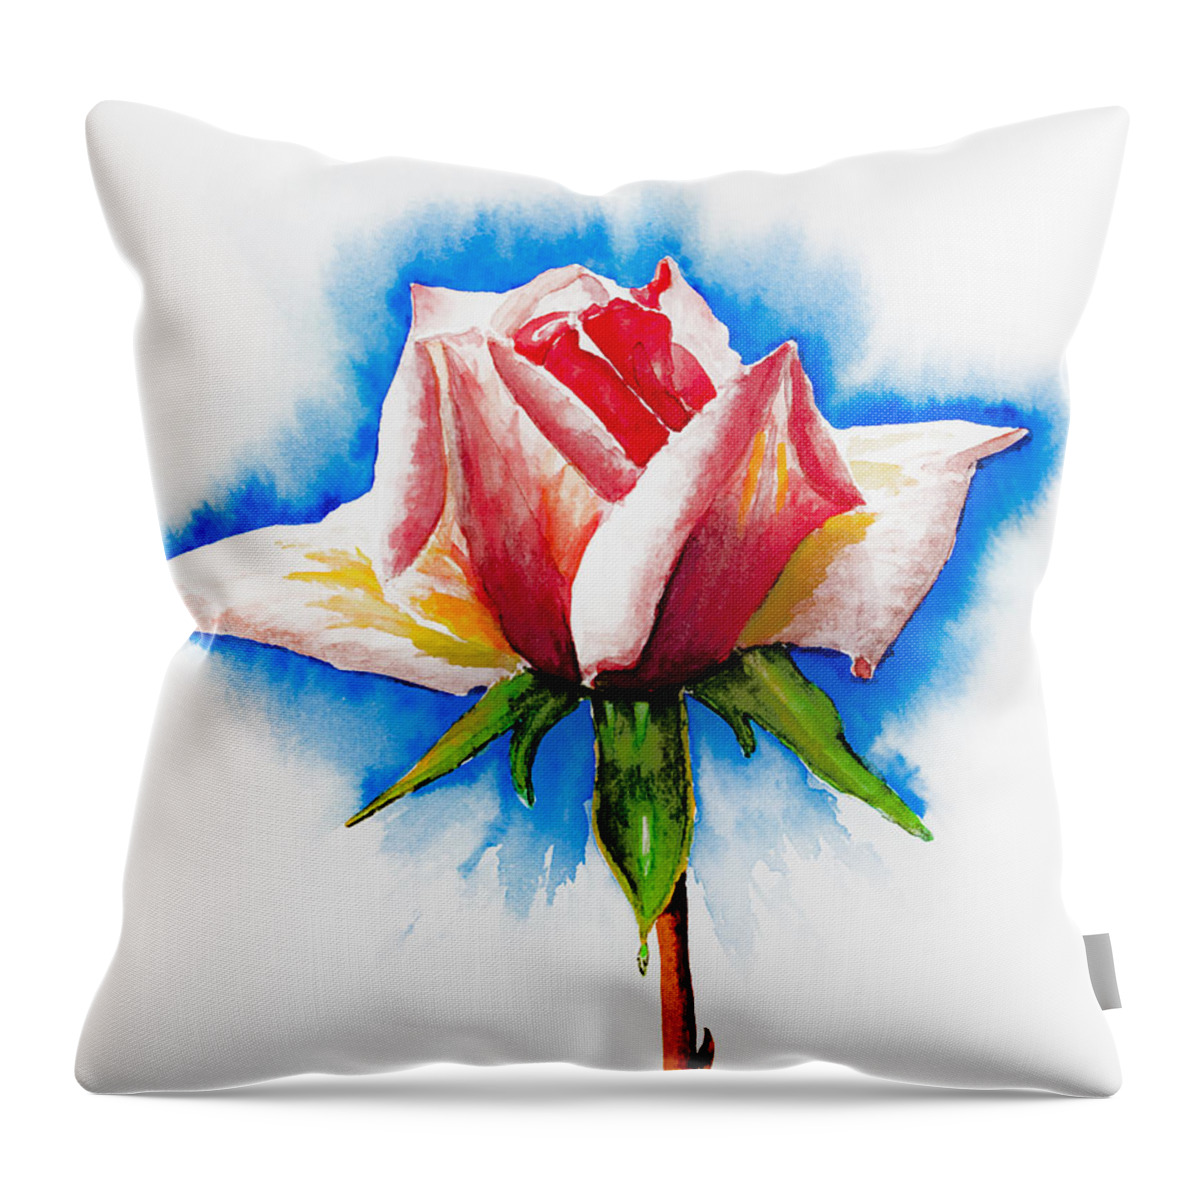 Black Throw Pillow featuring the painting Pink Rose by Svetlana Sewell